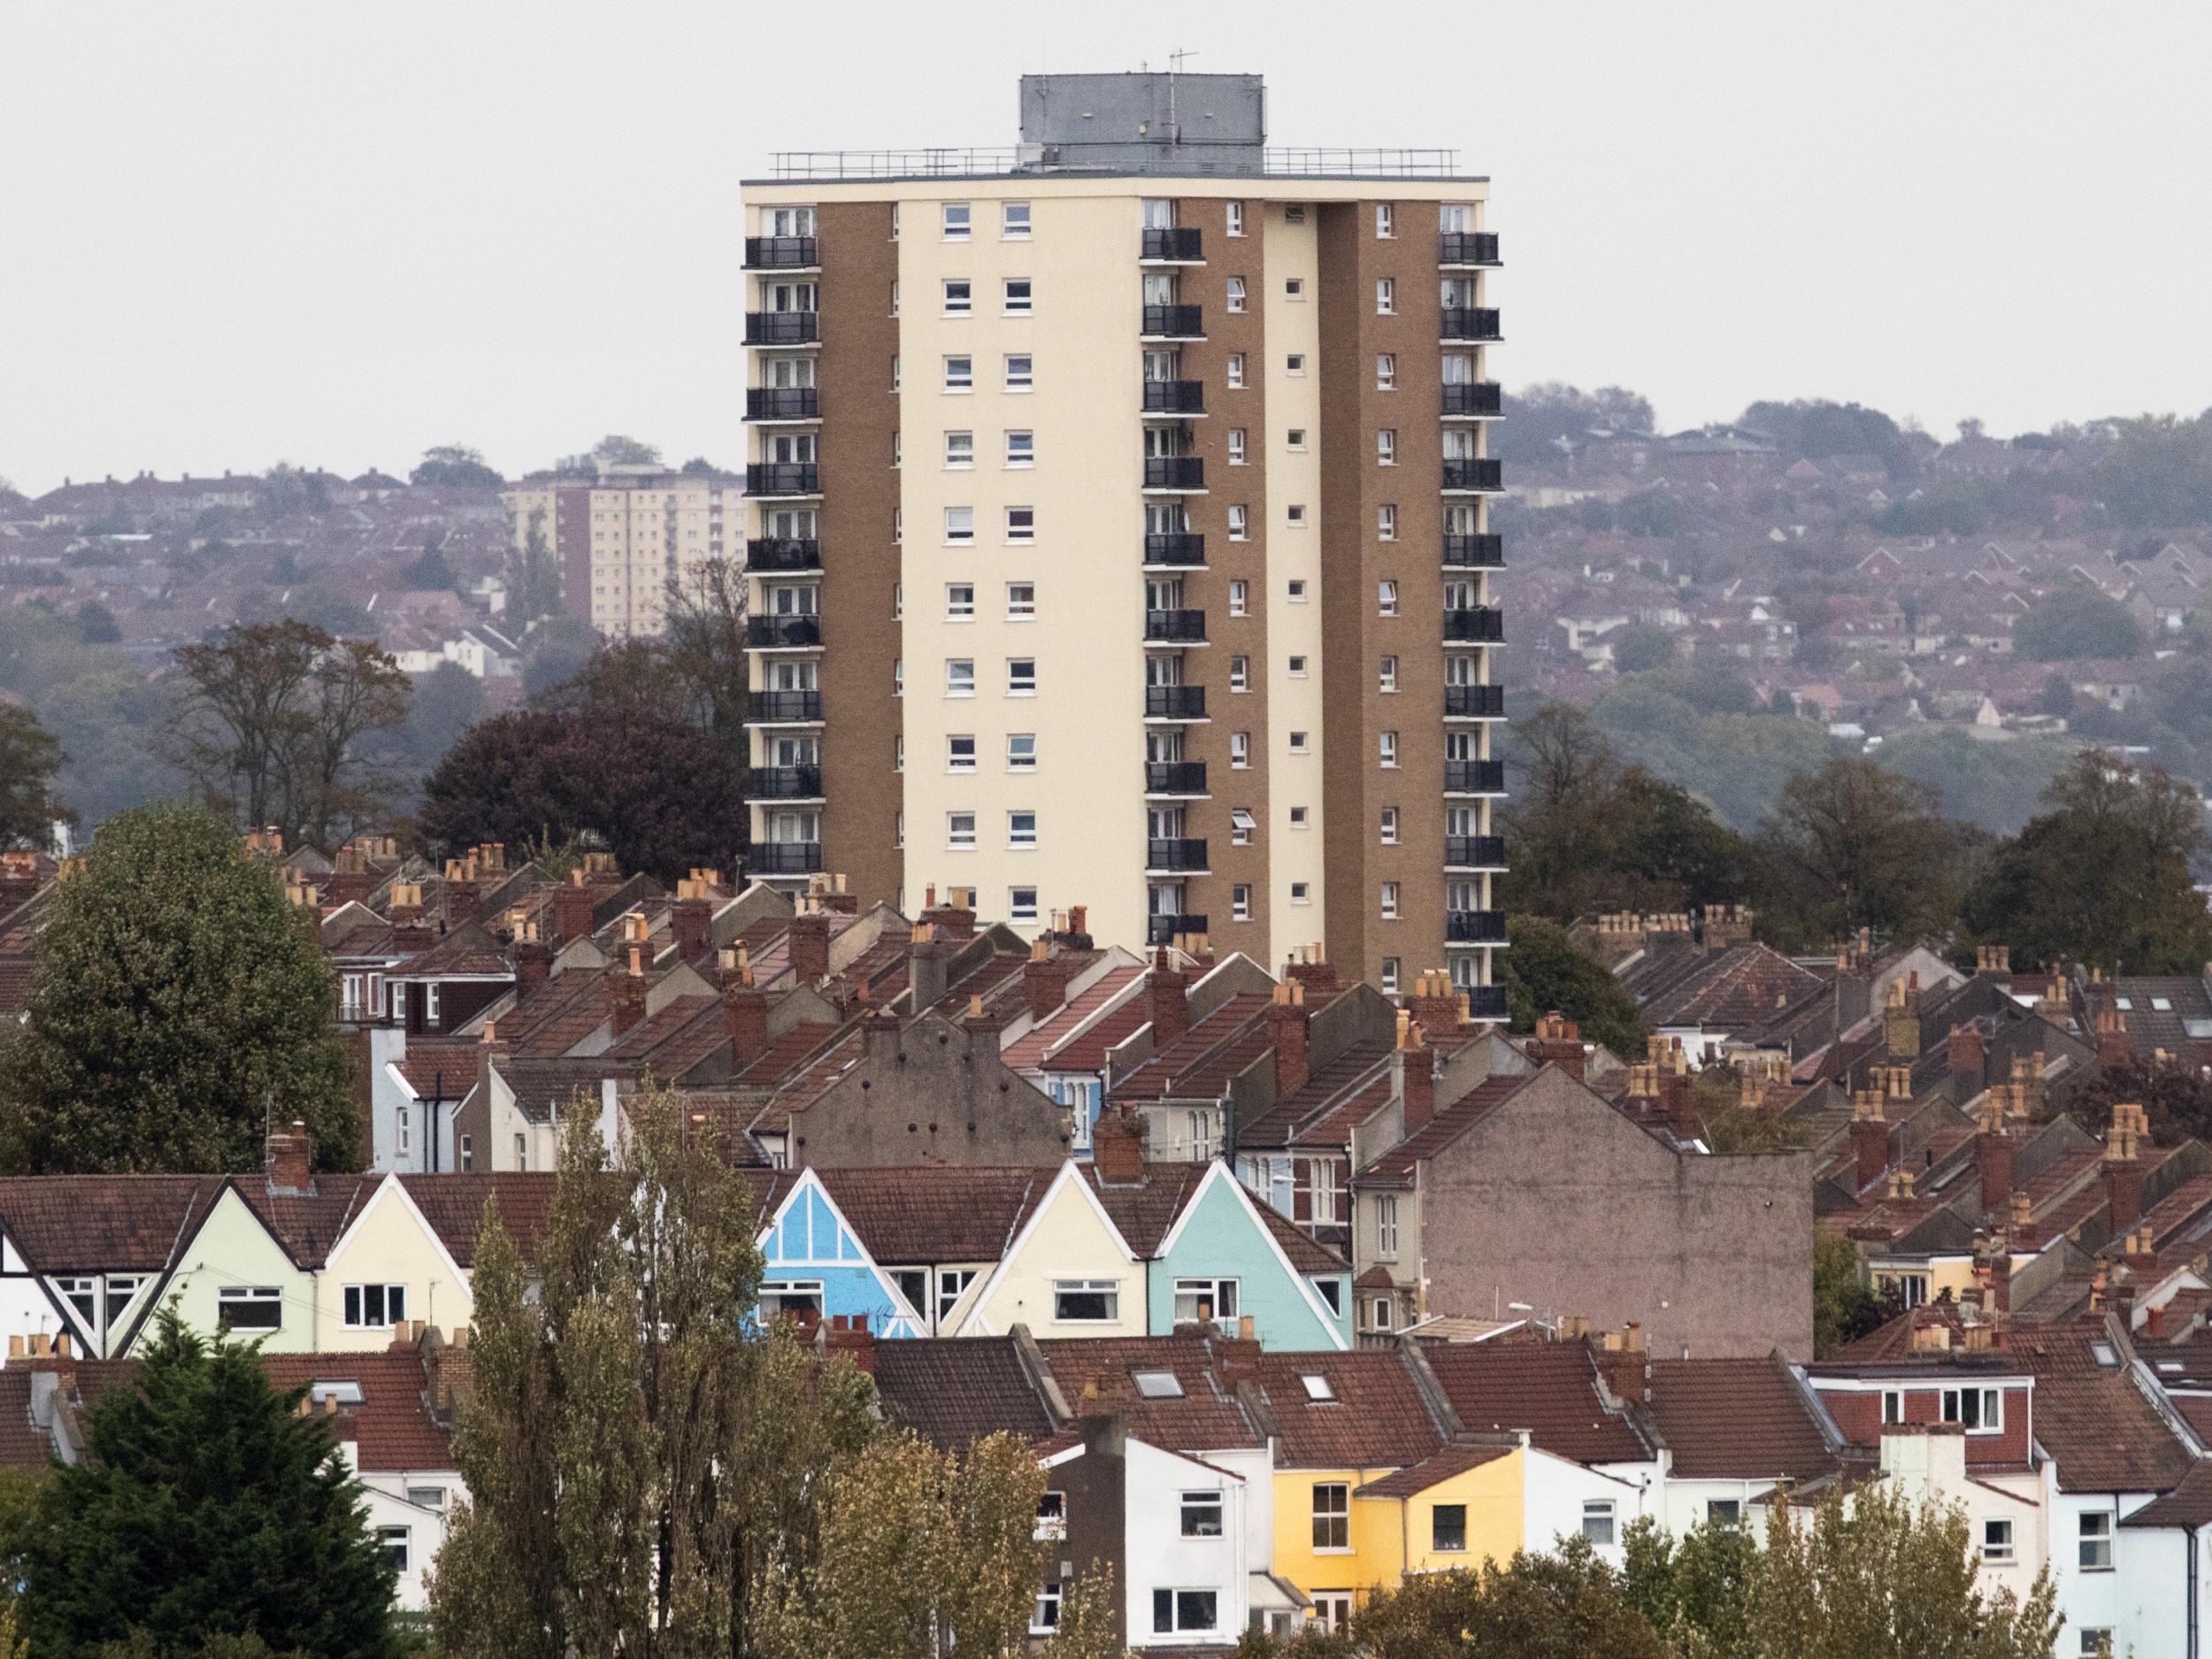 The Government has prioritised the building of affordable homes, which are more expensive than social homes